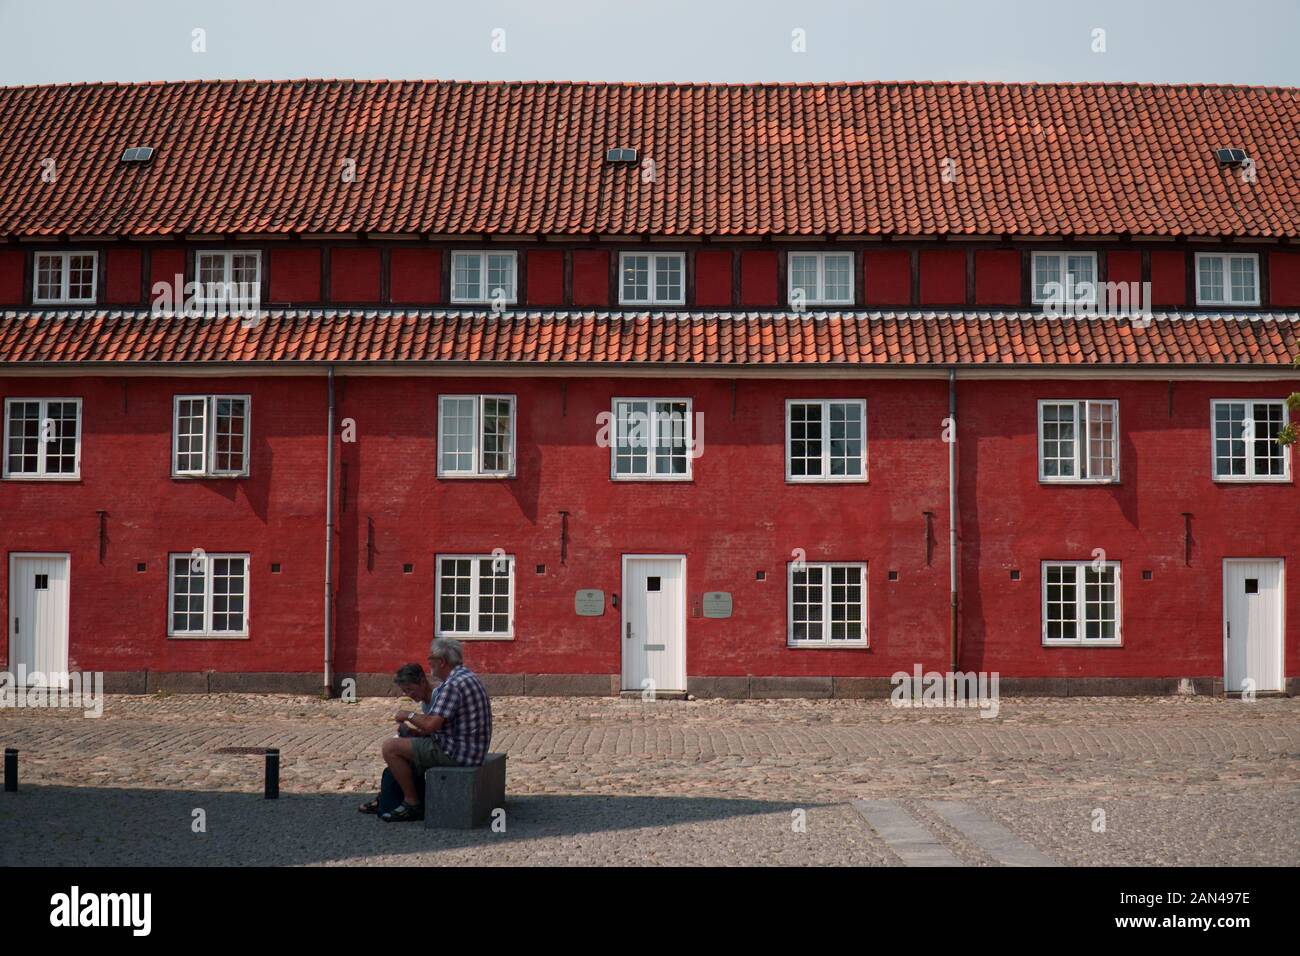 People sit on a bench in front of houses on the island of Kastellet in Copenhagen, Denmark Stock Photo